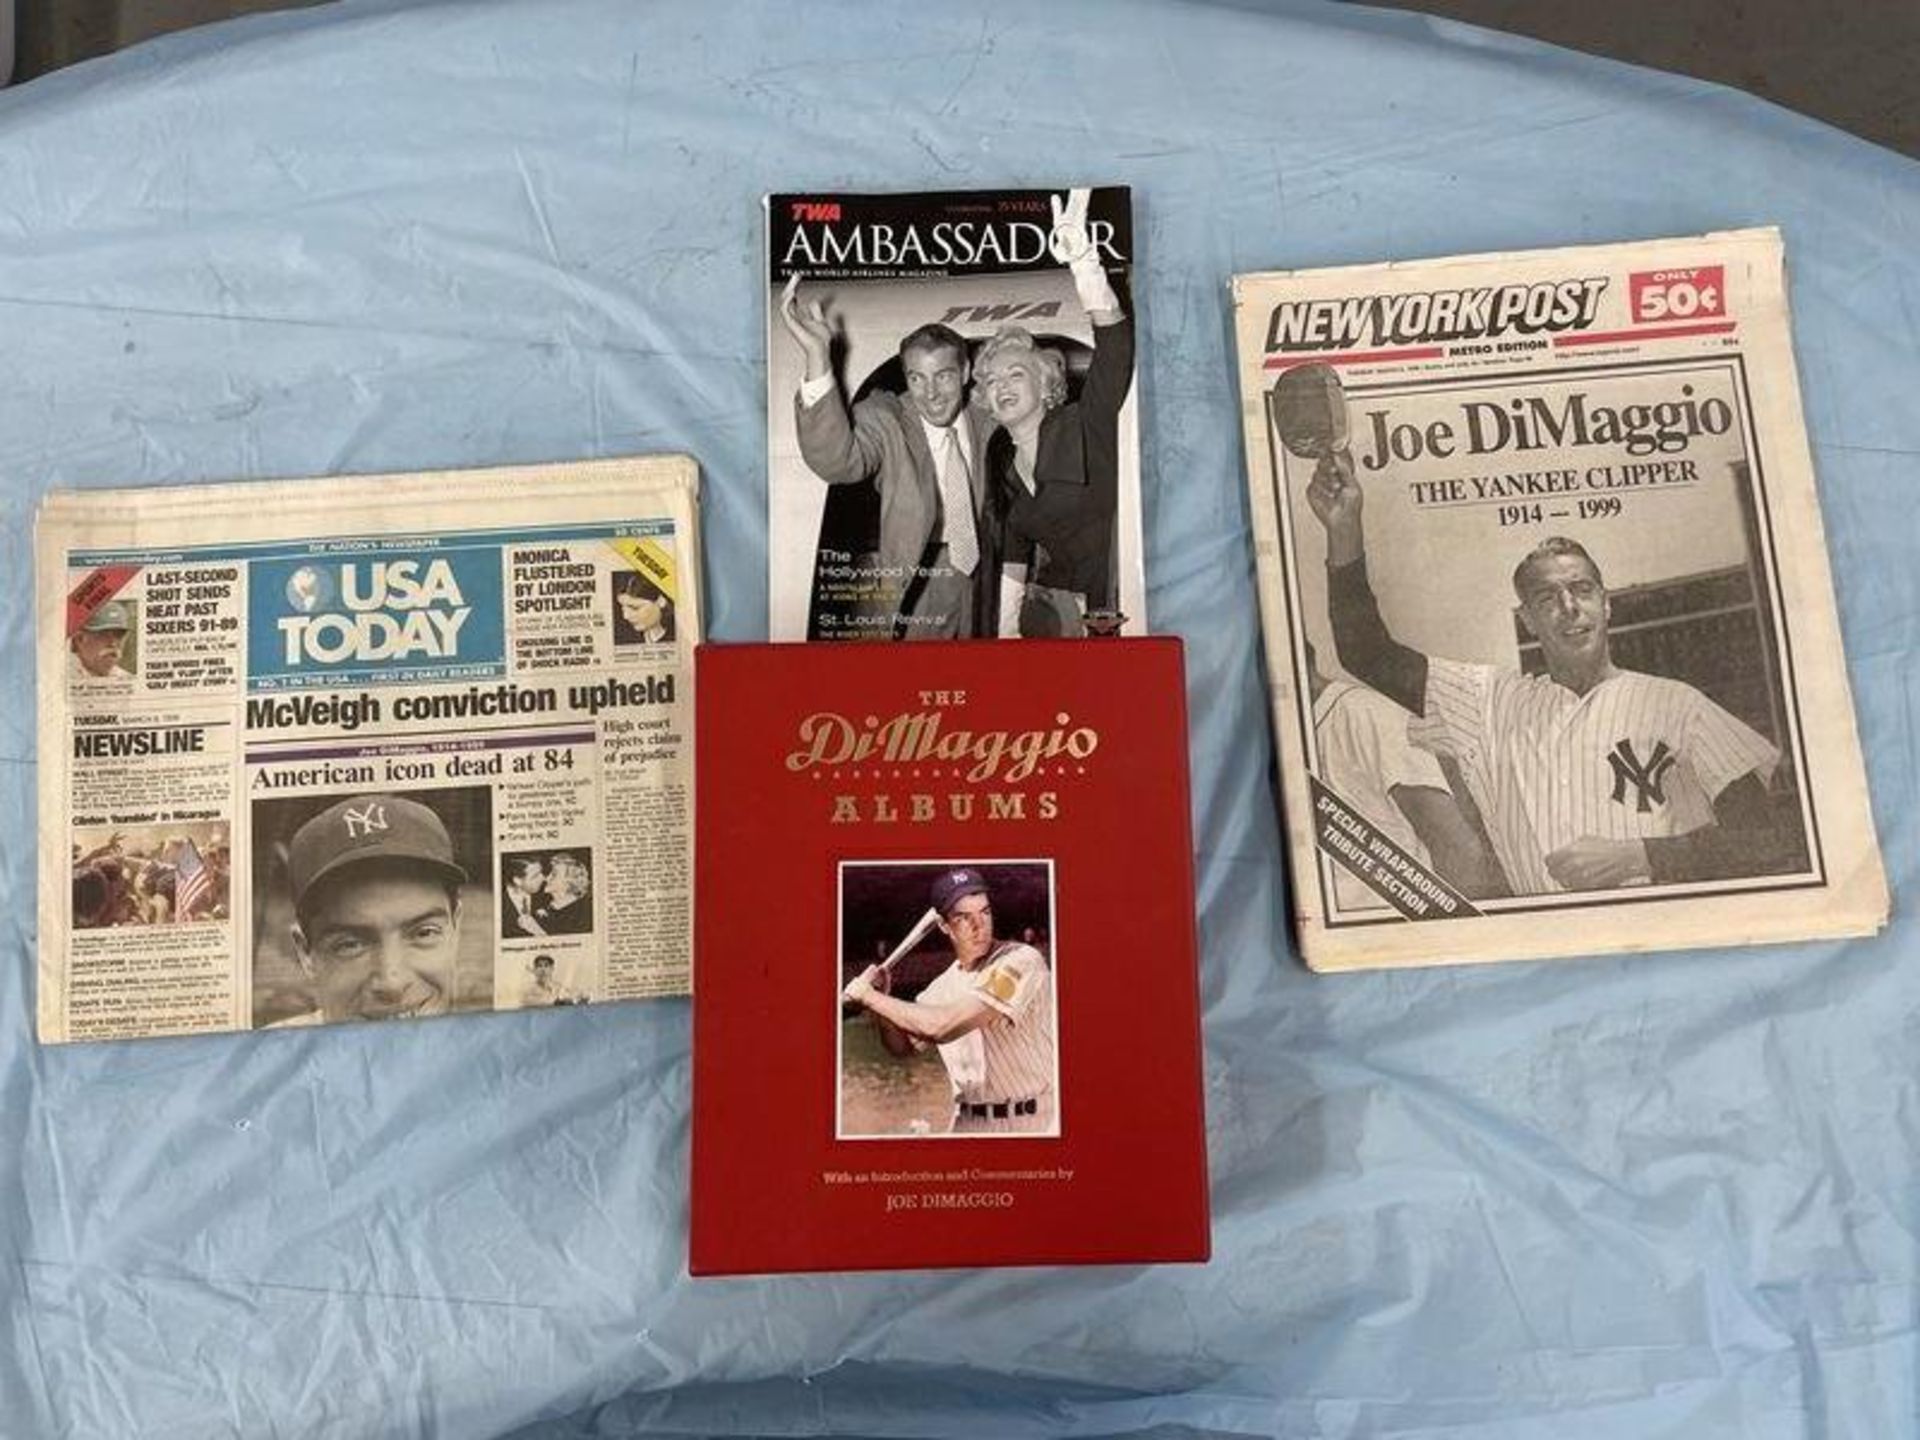 (Lot) Joe DiMaggio package c/o: never opened 2 volume album in case, (2) newspapers